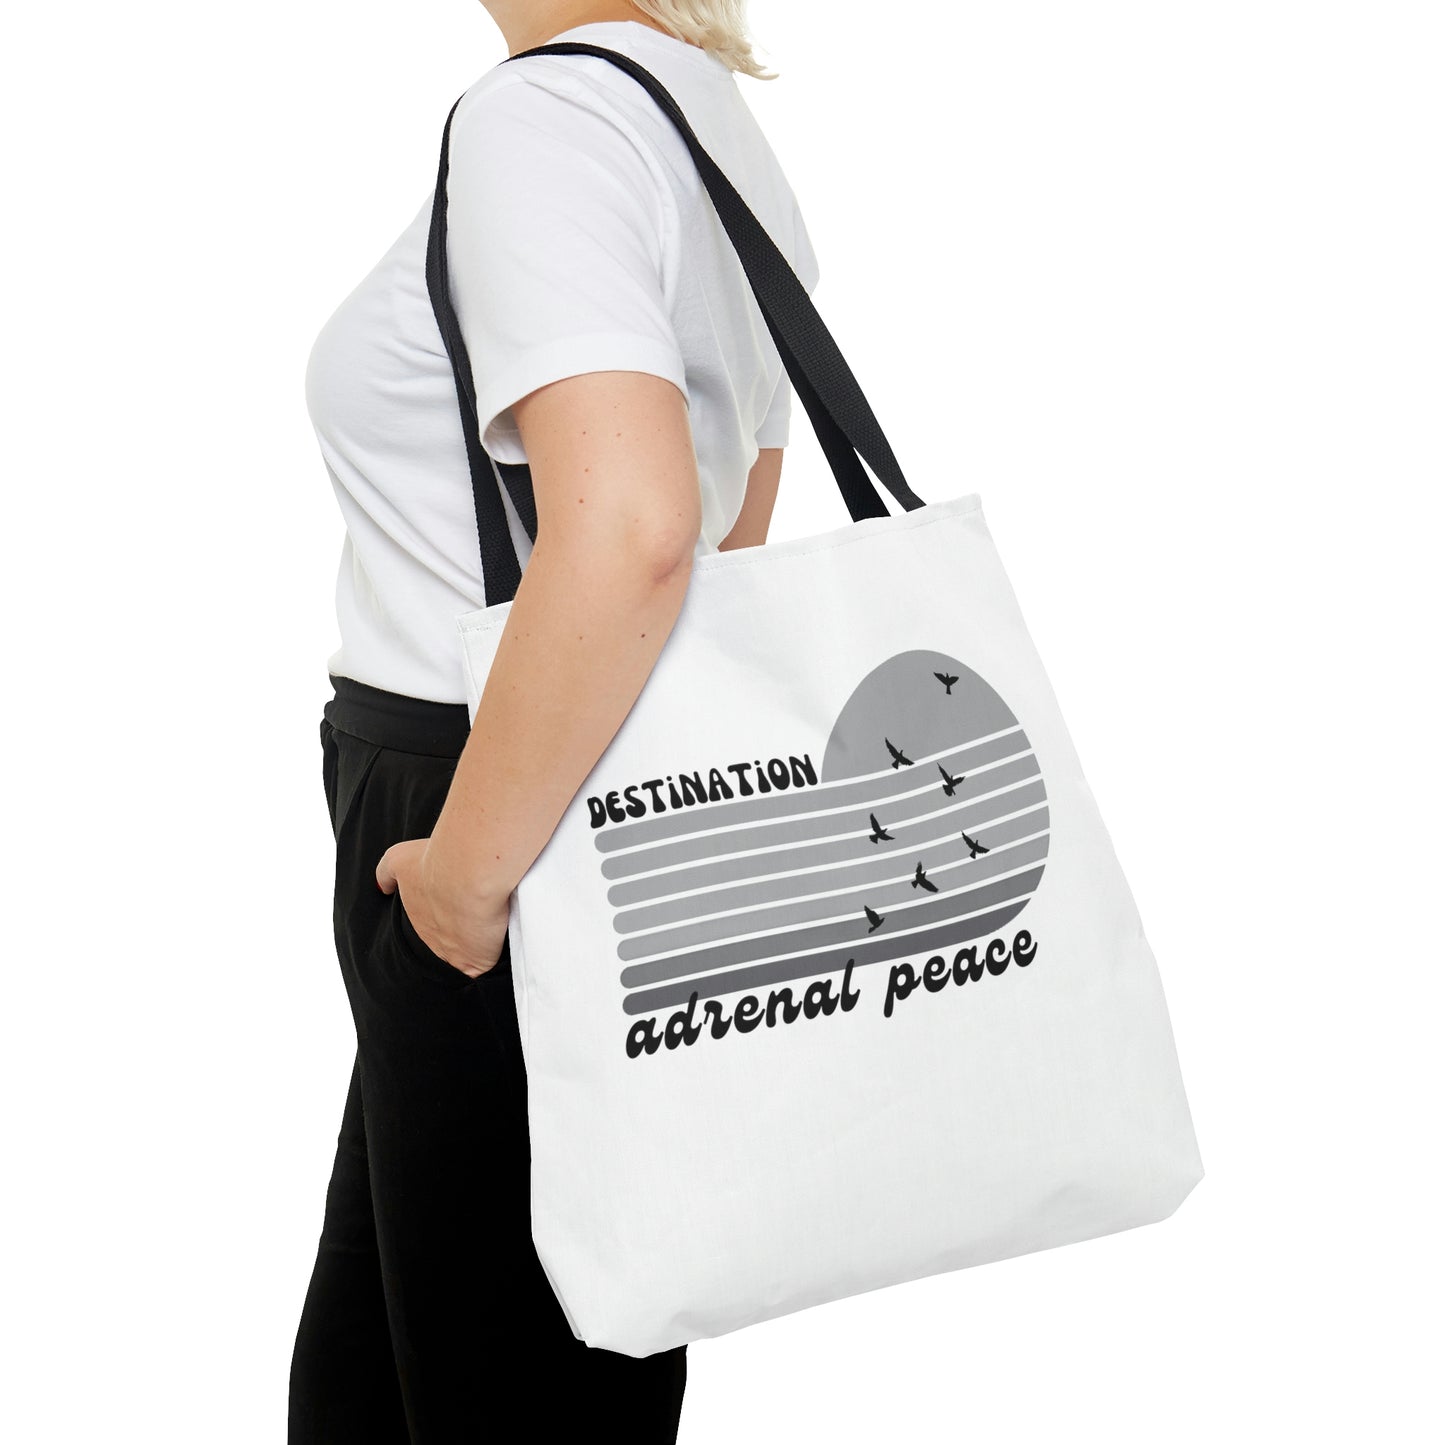 Destination: Adrenal Peace (grayscale) Tote Bag in 3 sizes